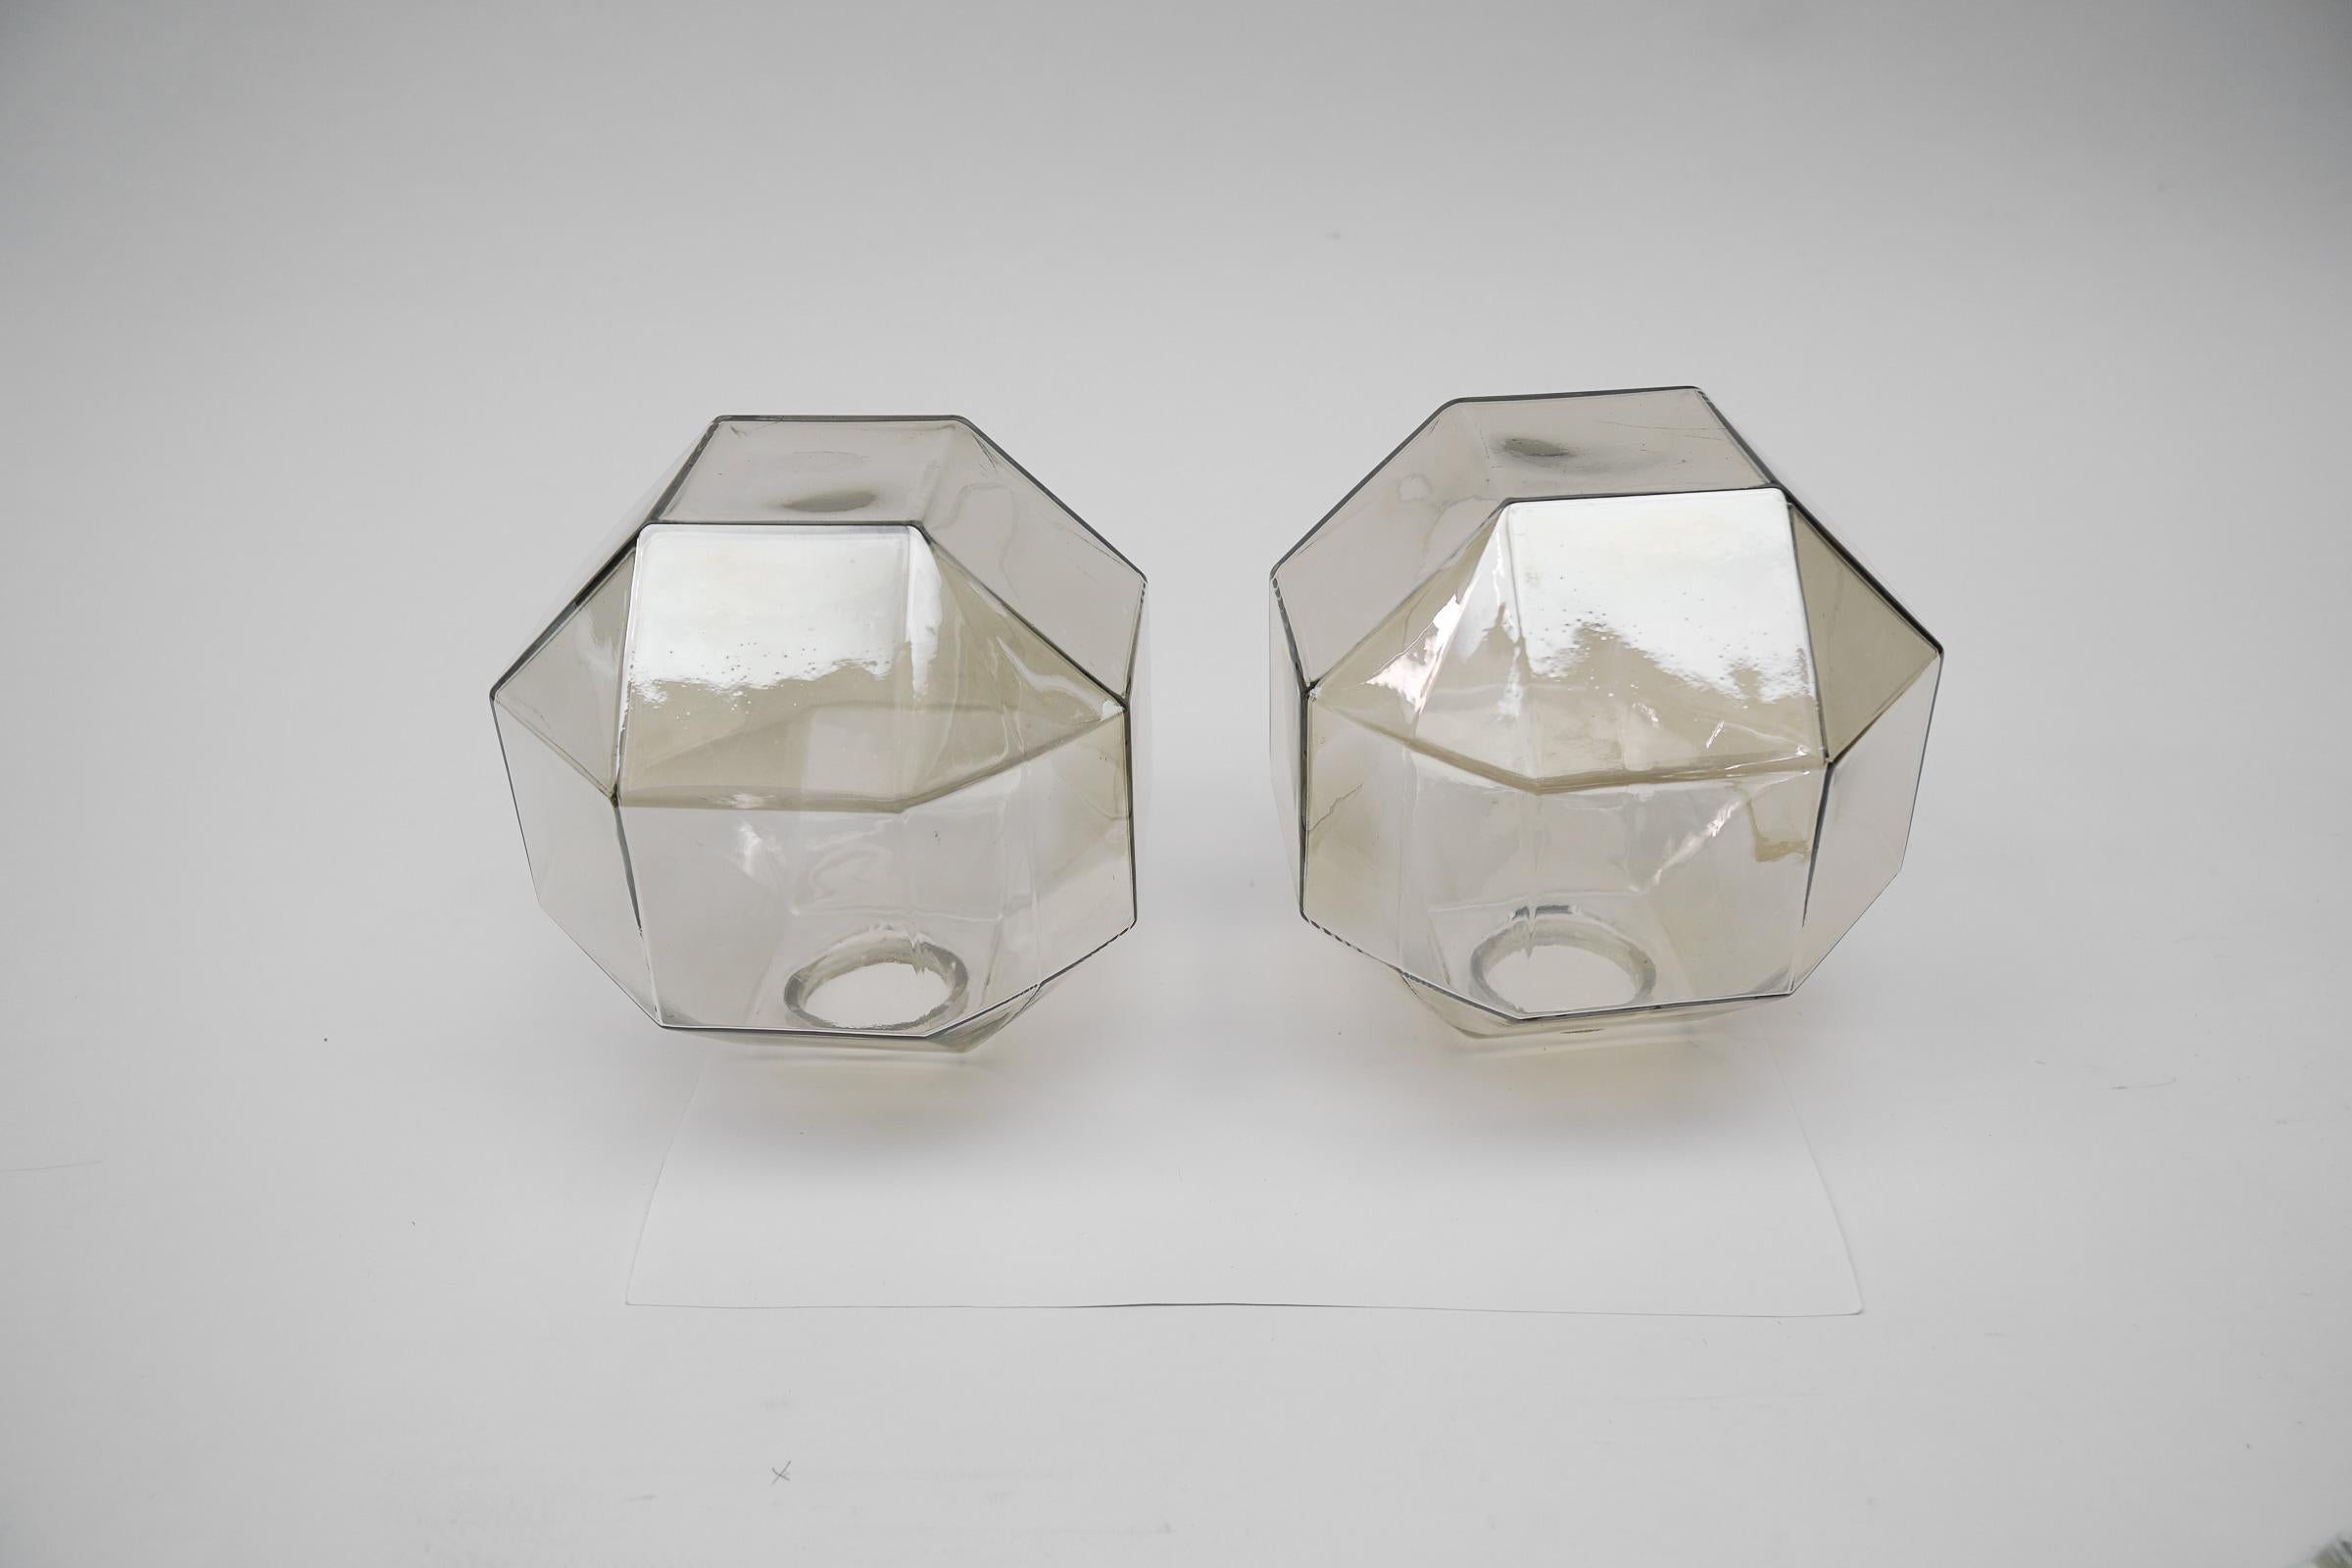 Pair Geometric Chrome and Smoked Glass Wall Lamps, 1960s For Sale 2